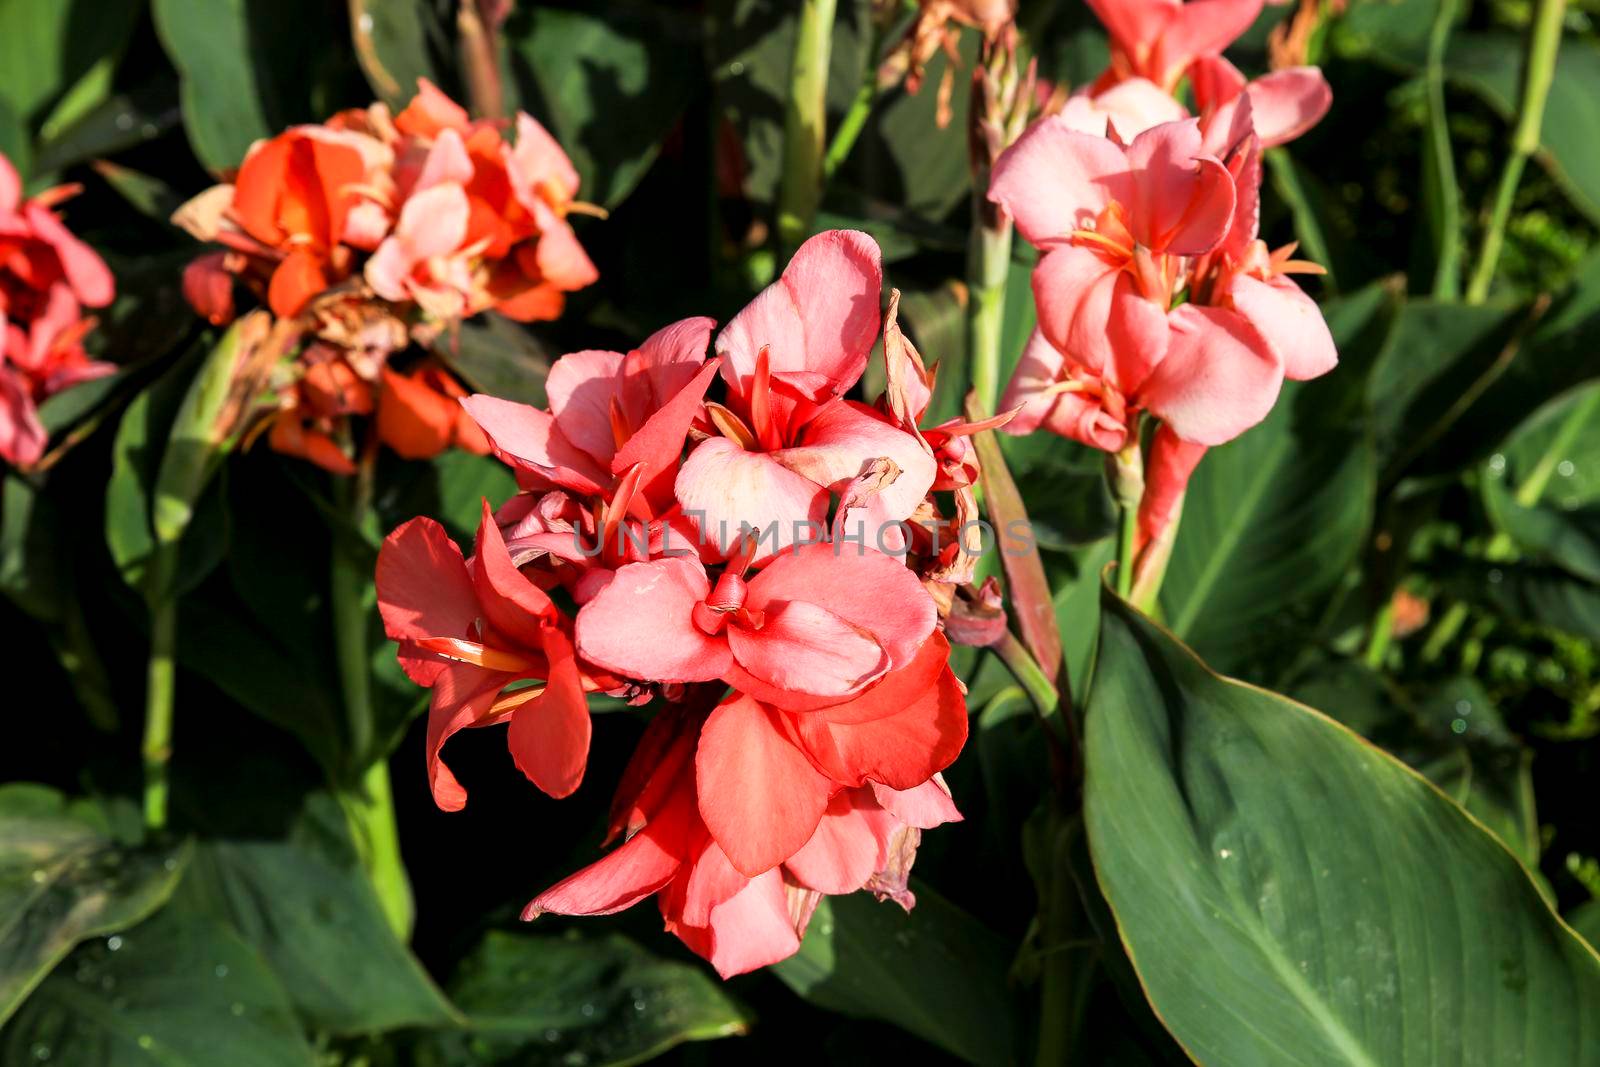 Beautiful Canna Indica plants in the garden by soniabonet